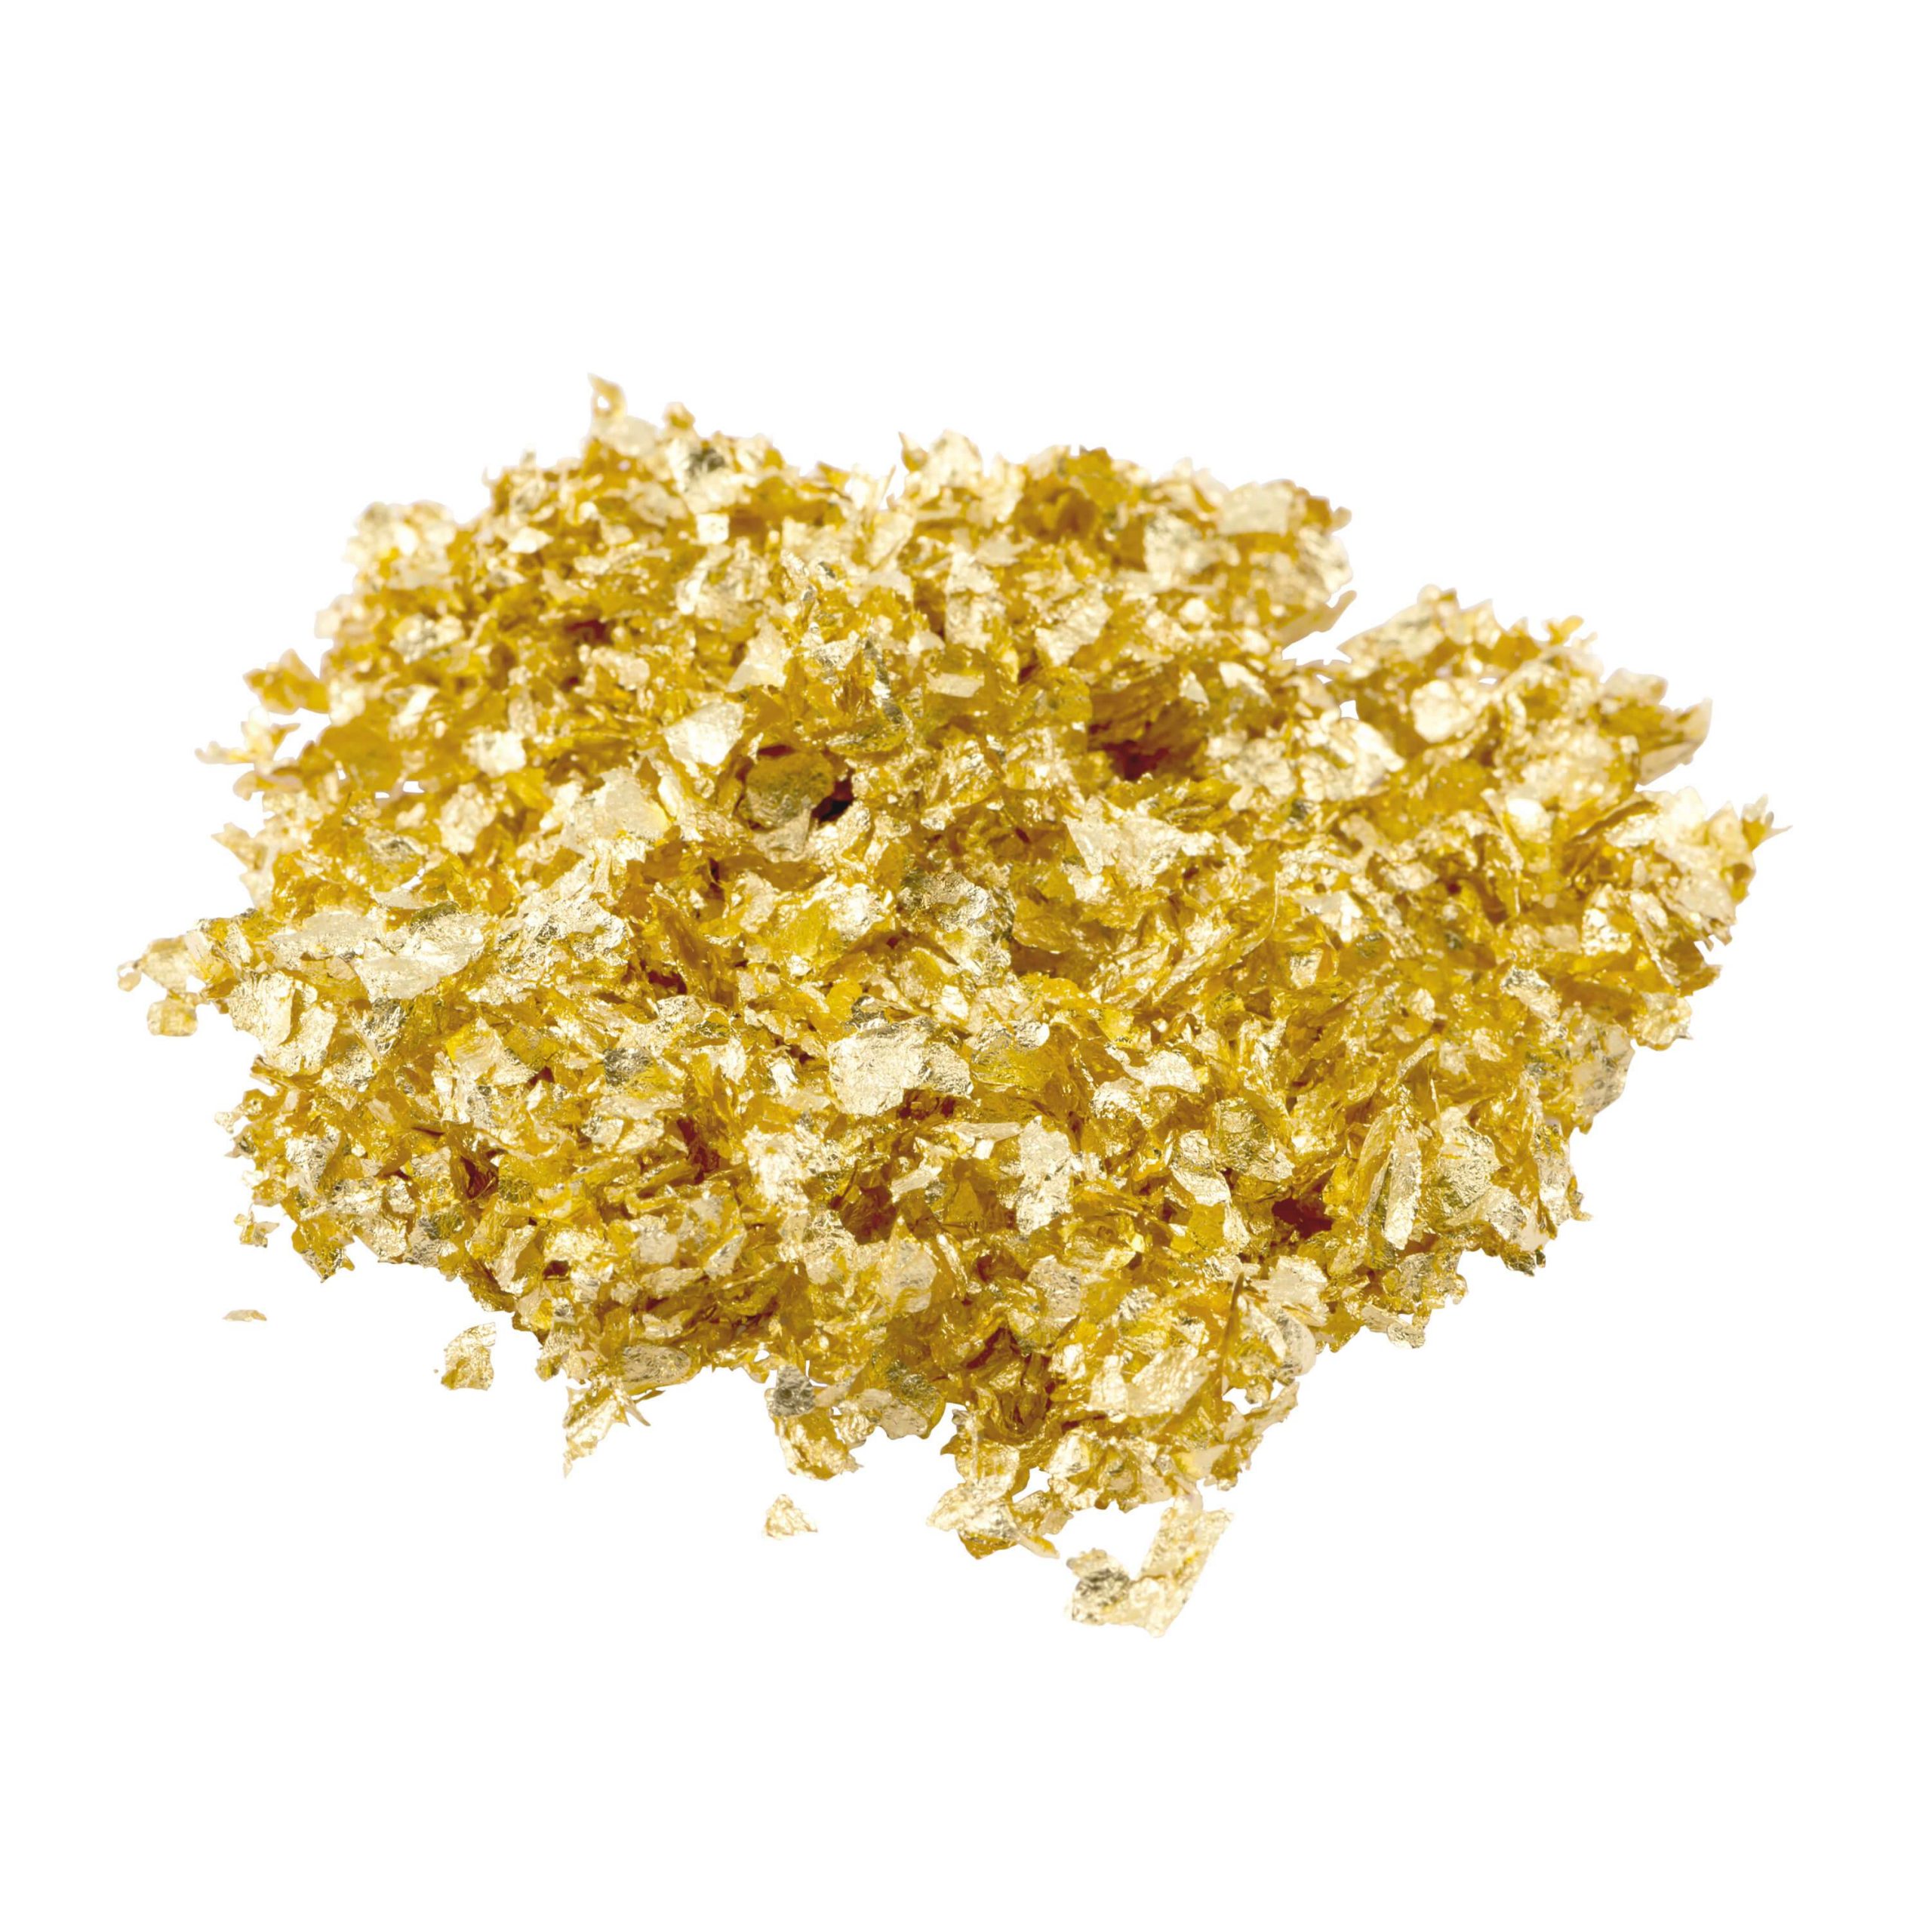 gold-flakes-edible-gold-leaf-flakes-for-garnishing-and-decoration-metal-leaf-slofoodgroup-25-mg-645991